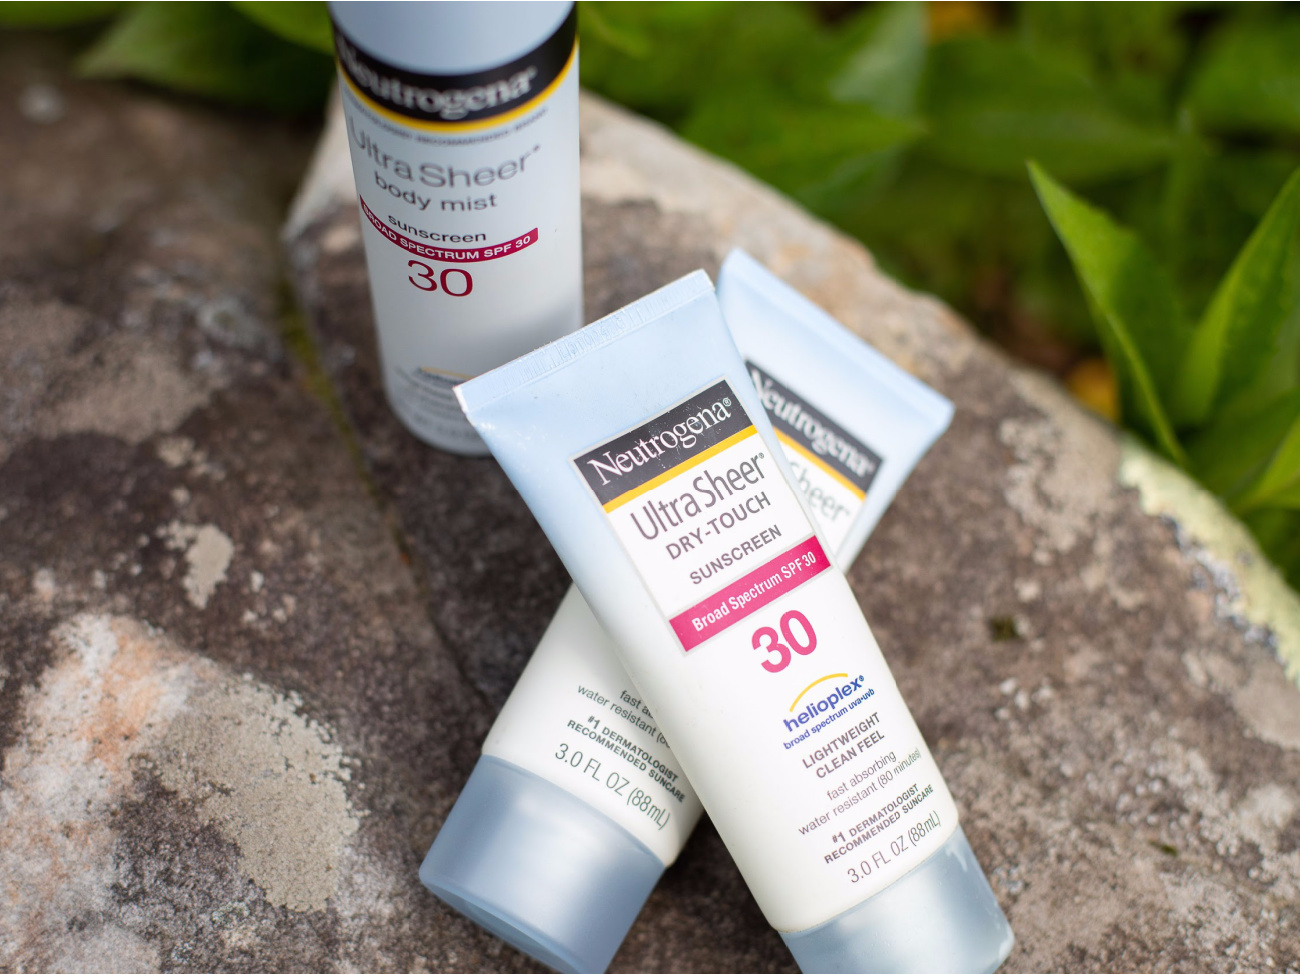 Neutrogena Sun Care Products As Low As $6.99 At Kroger (Regular Price Up To $11.49)